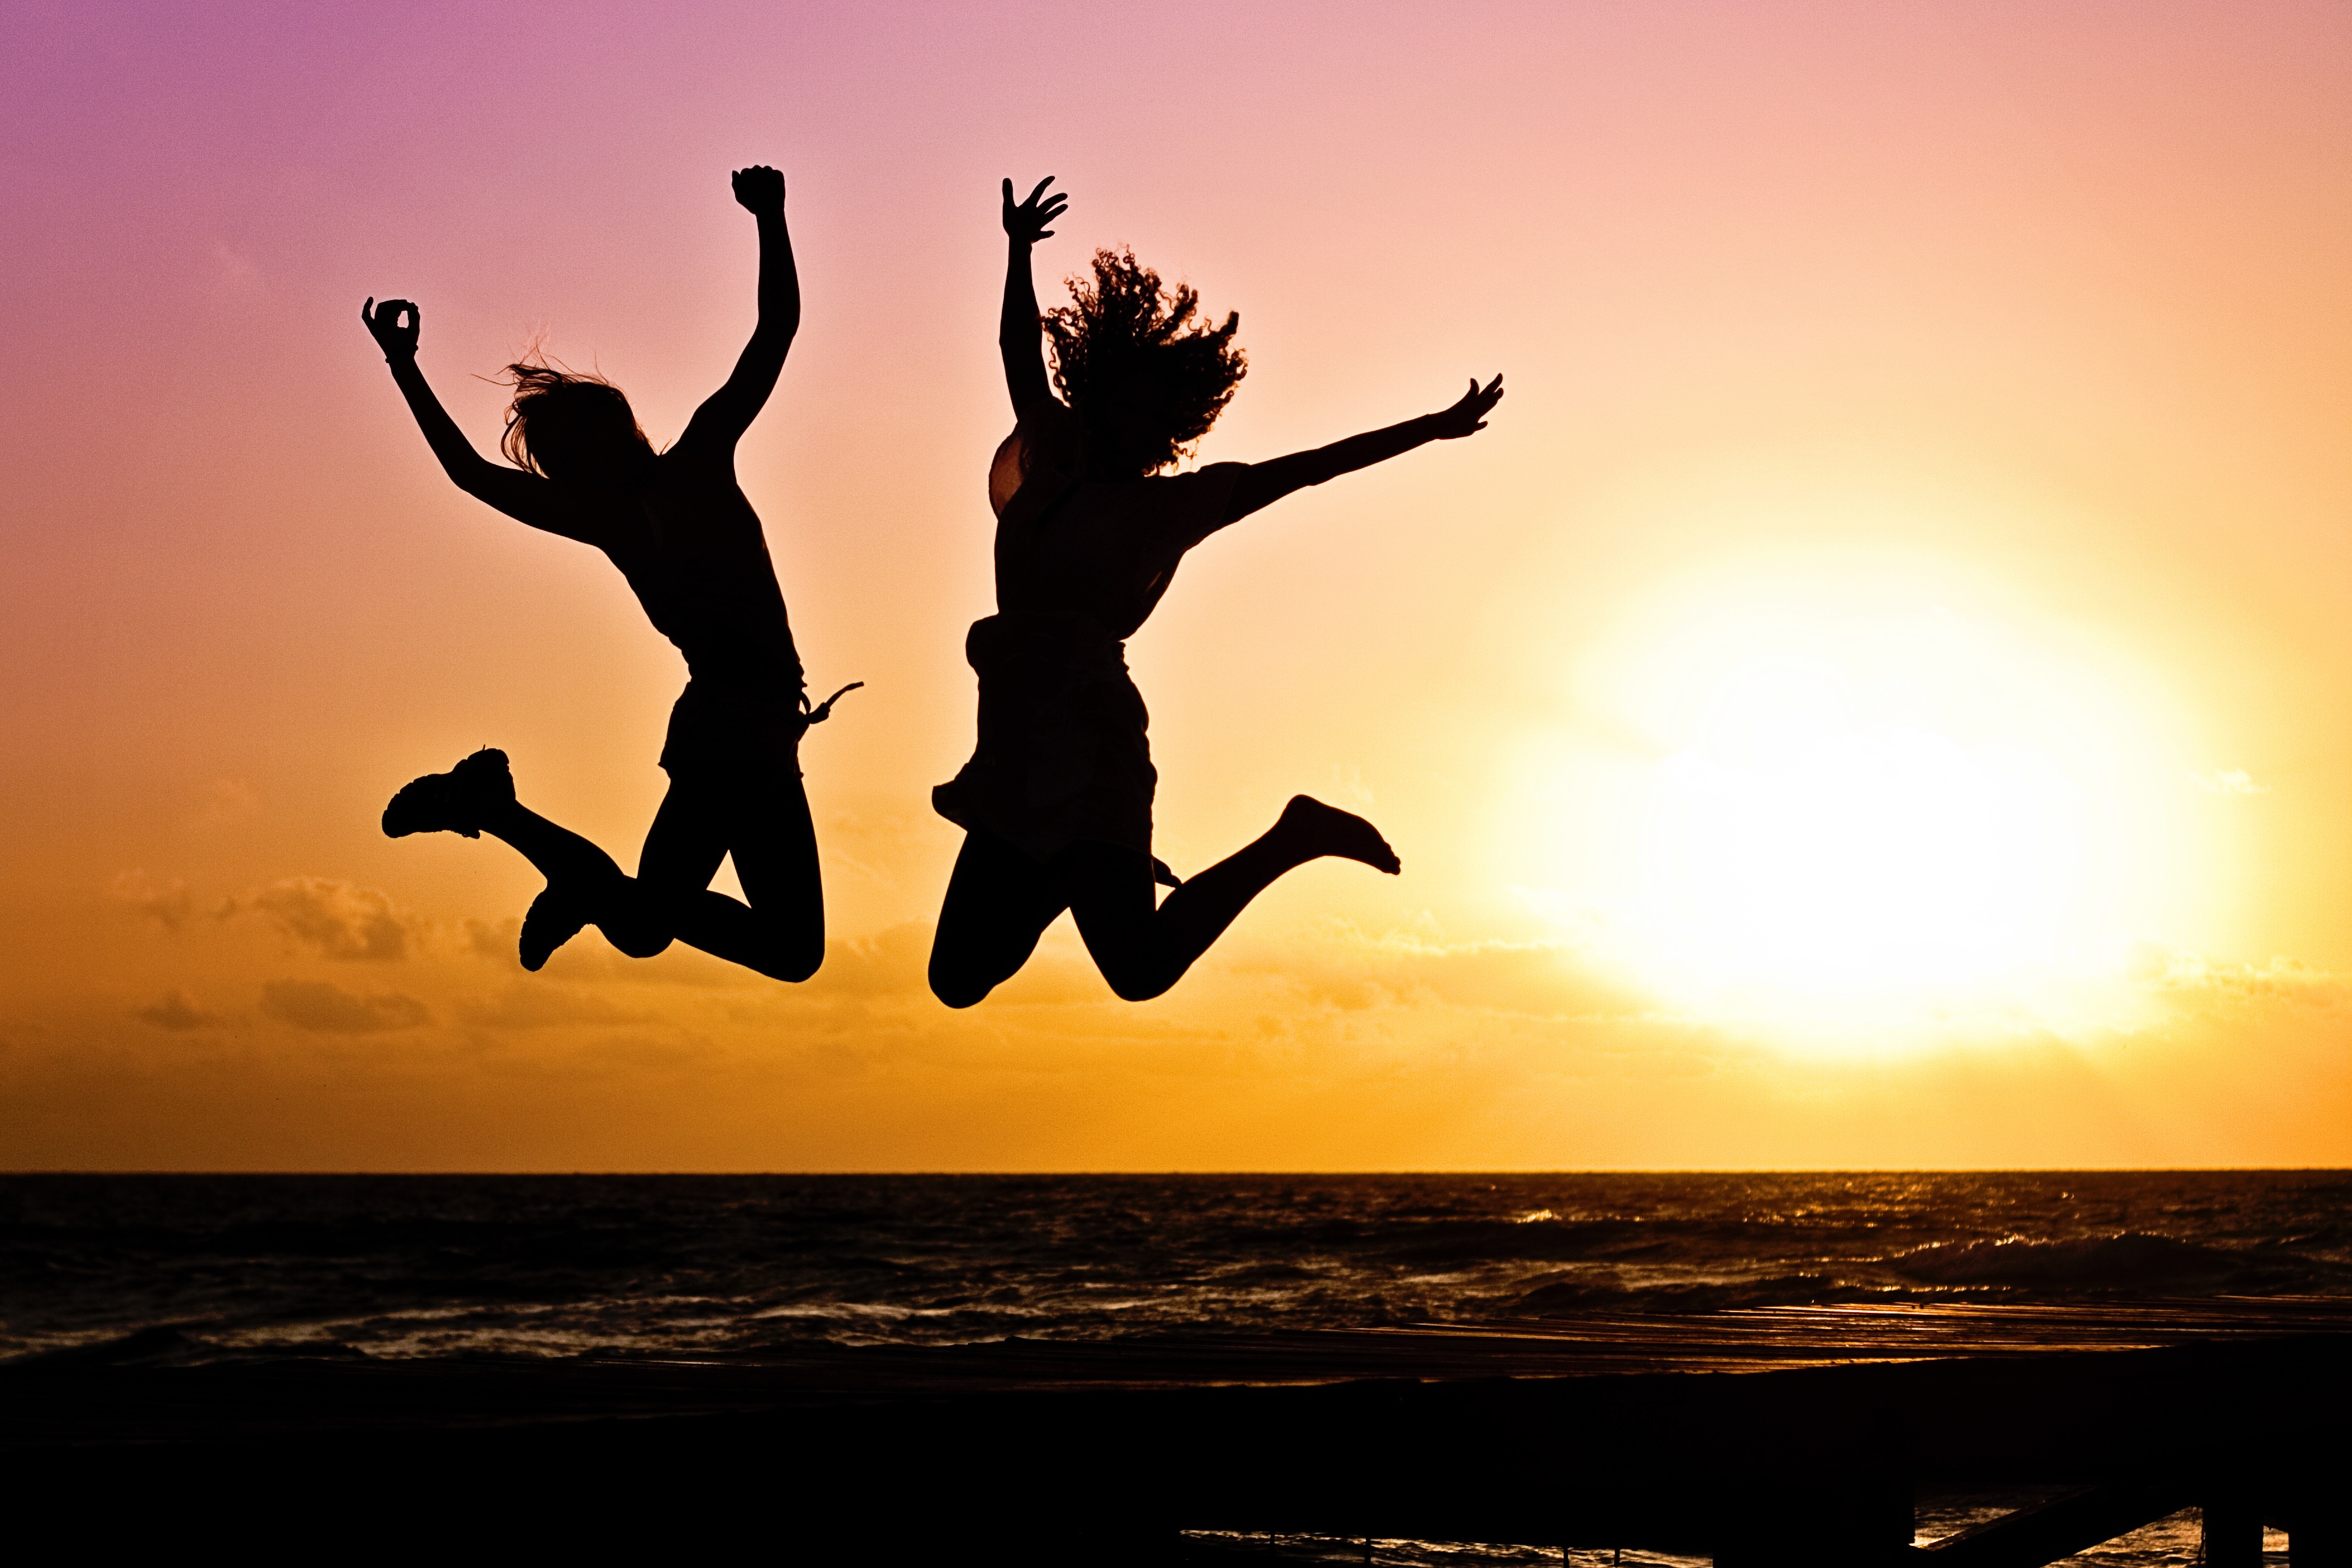 Young People Jumping Image Free Stock Photo Public Domain Photo